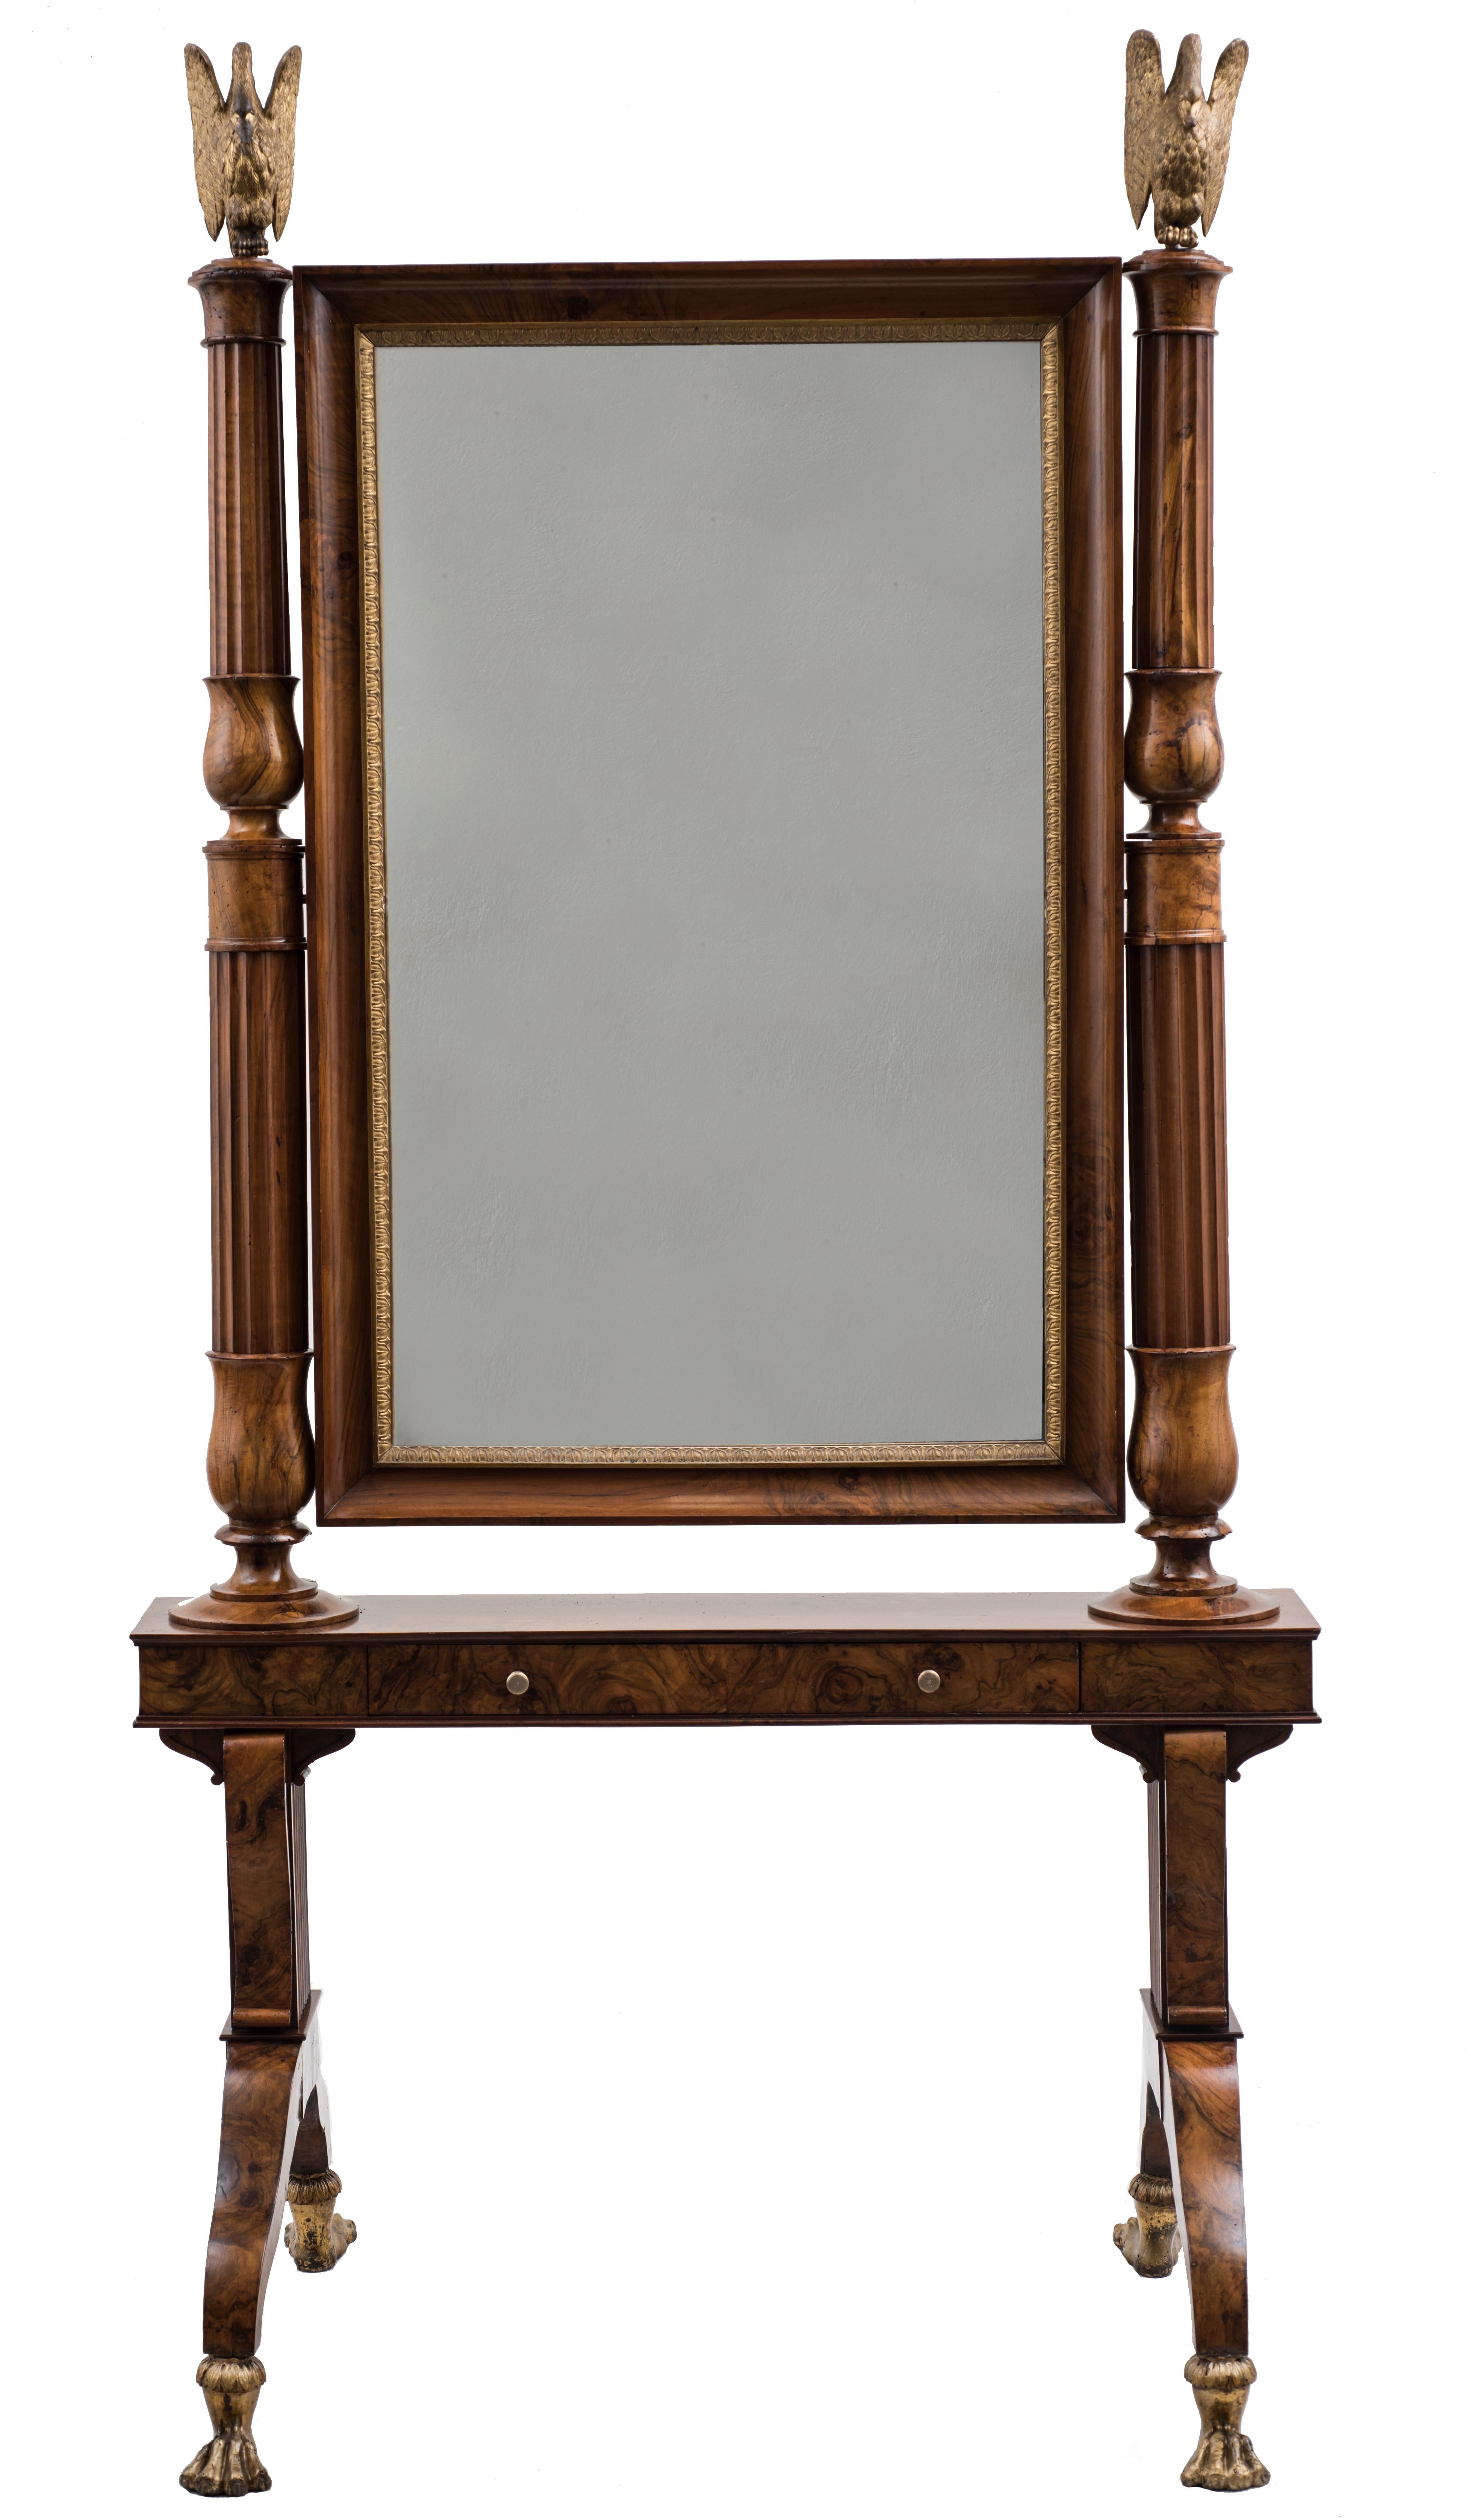 Empire style mirror is a precious decorative object realized in Emilia (Italy) in the first fourth of the 19th century. 

Splendid pivoting mirror (psicè) in walnut and briar of olive. The mirror frame is decorated with Empire leaflets. the mirror